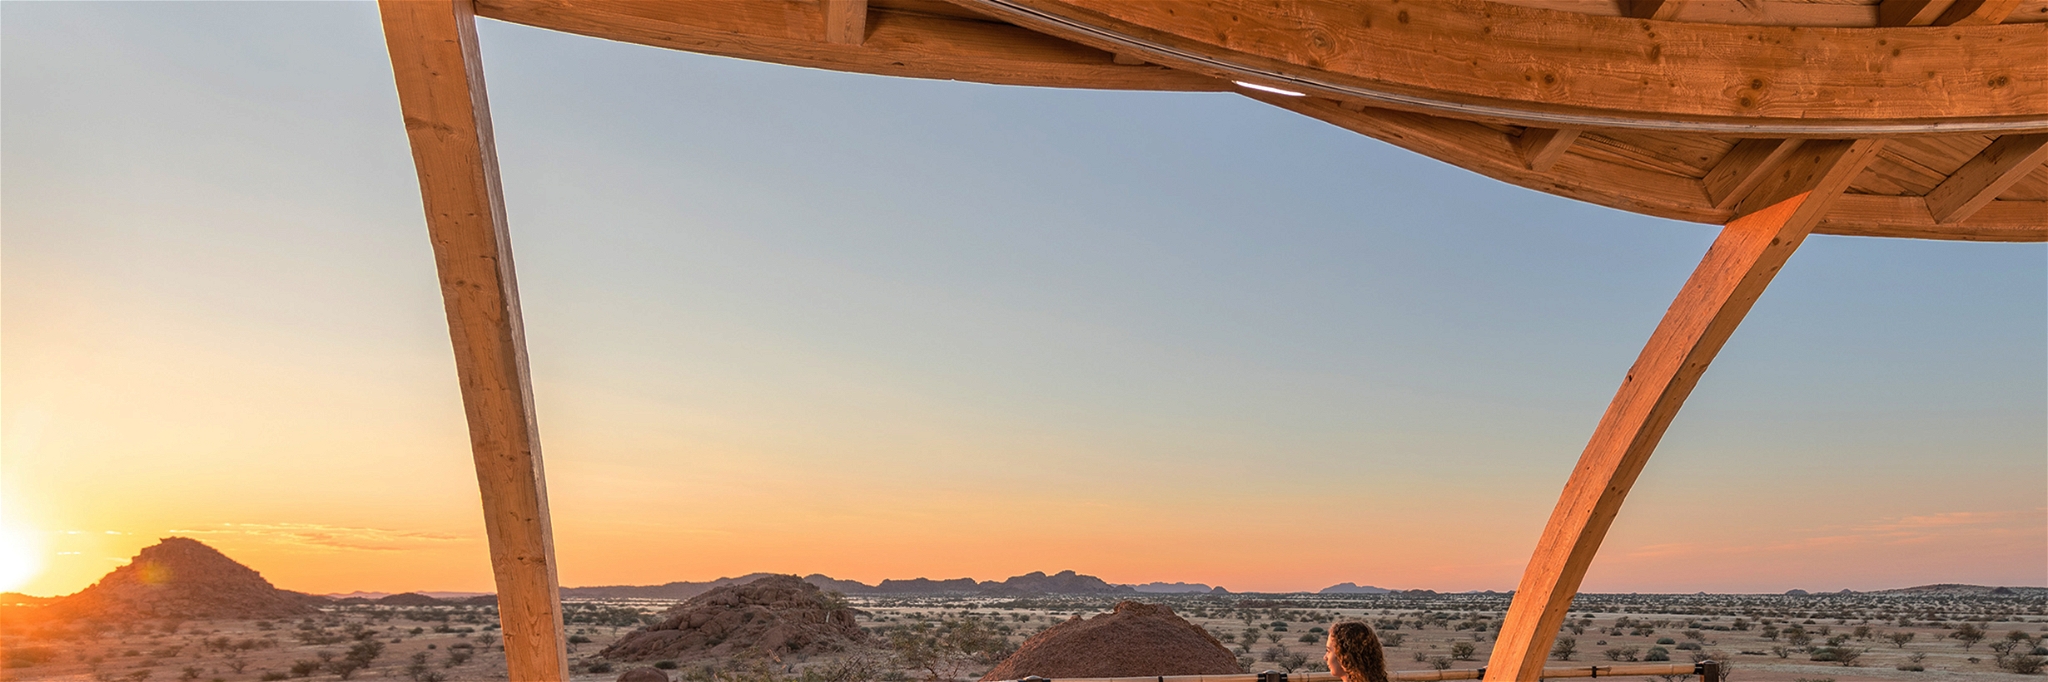 Onduli Ridge has six luxury suites and is destined to become the flagship of Ultimate Safaris, a Namibian travel company.